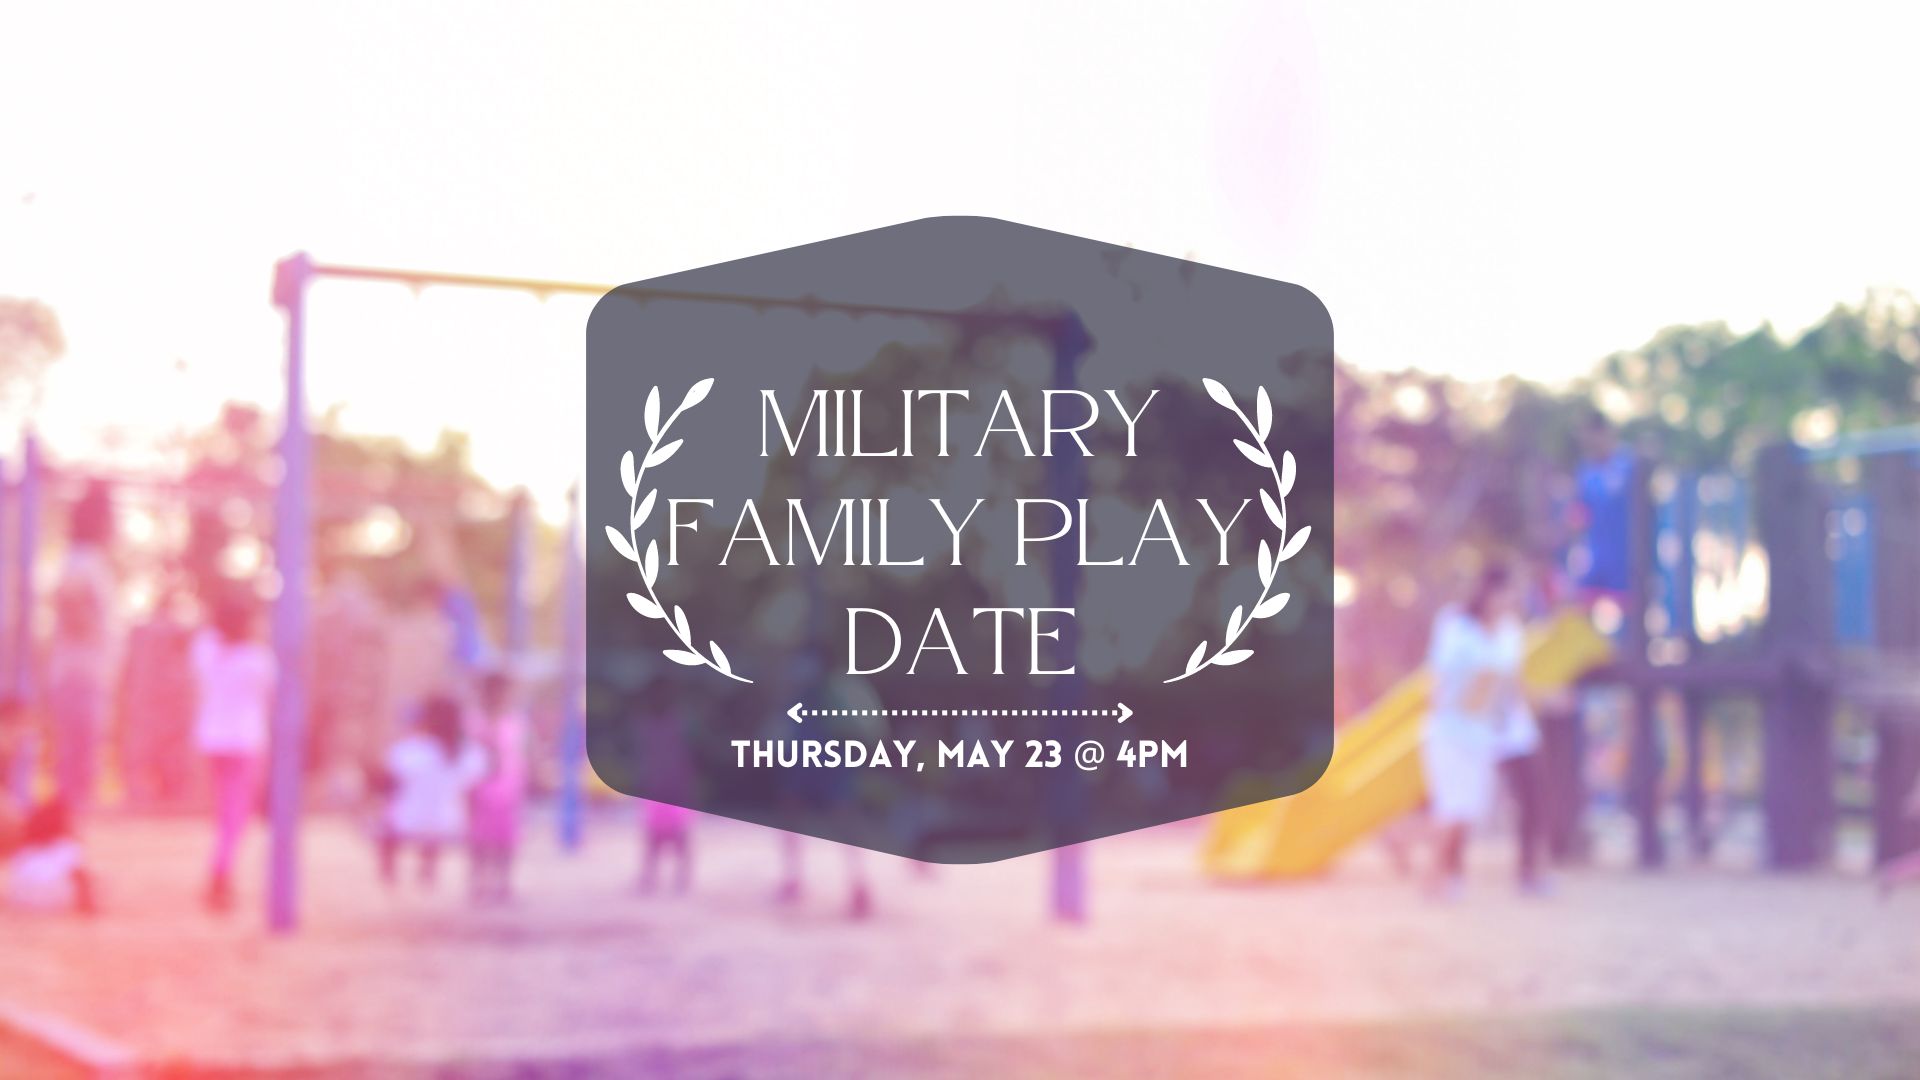 Background photo of children playing on playground with test saying "Military family play date, Thursday, May 23 at 4pm"